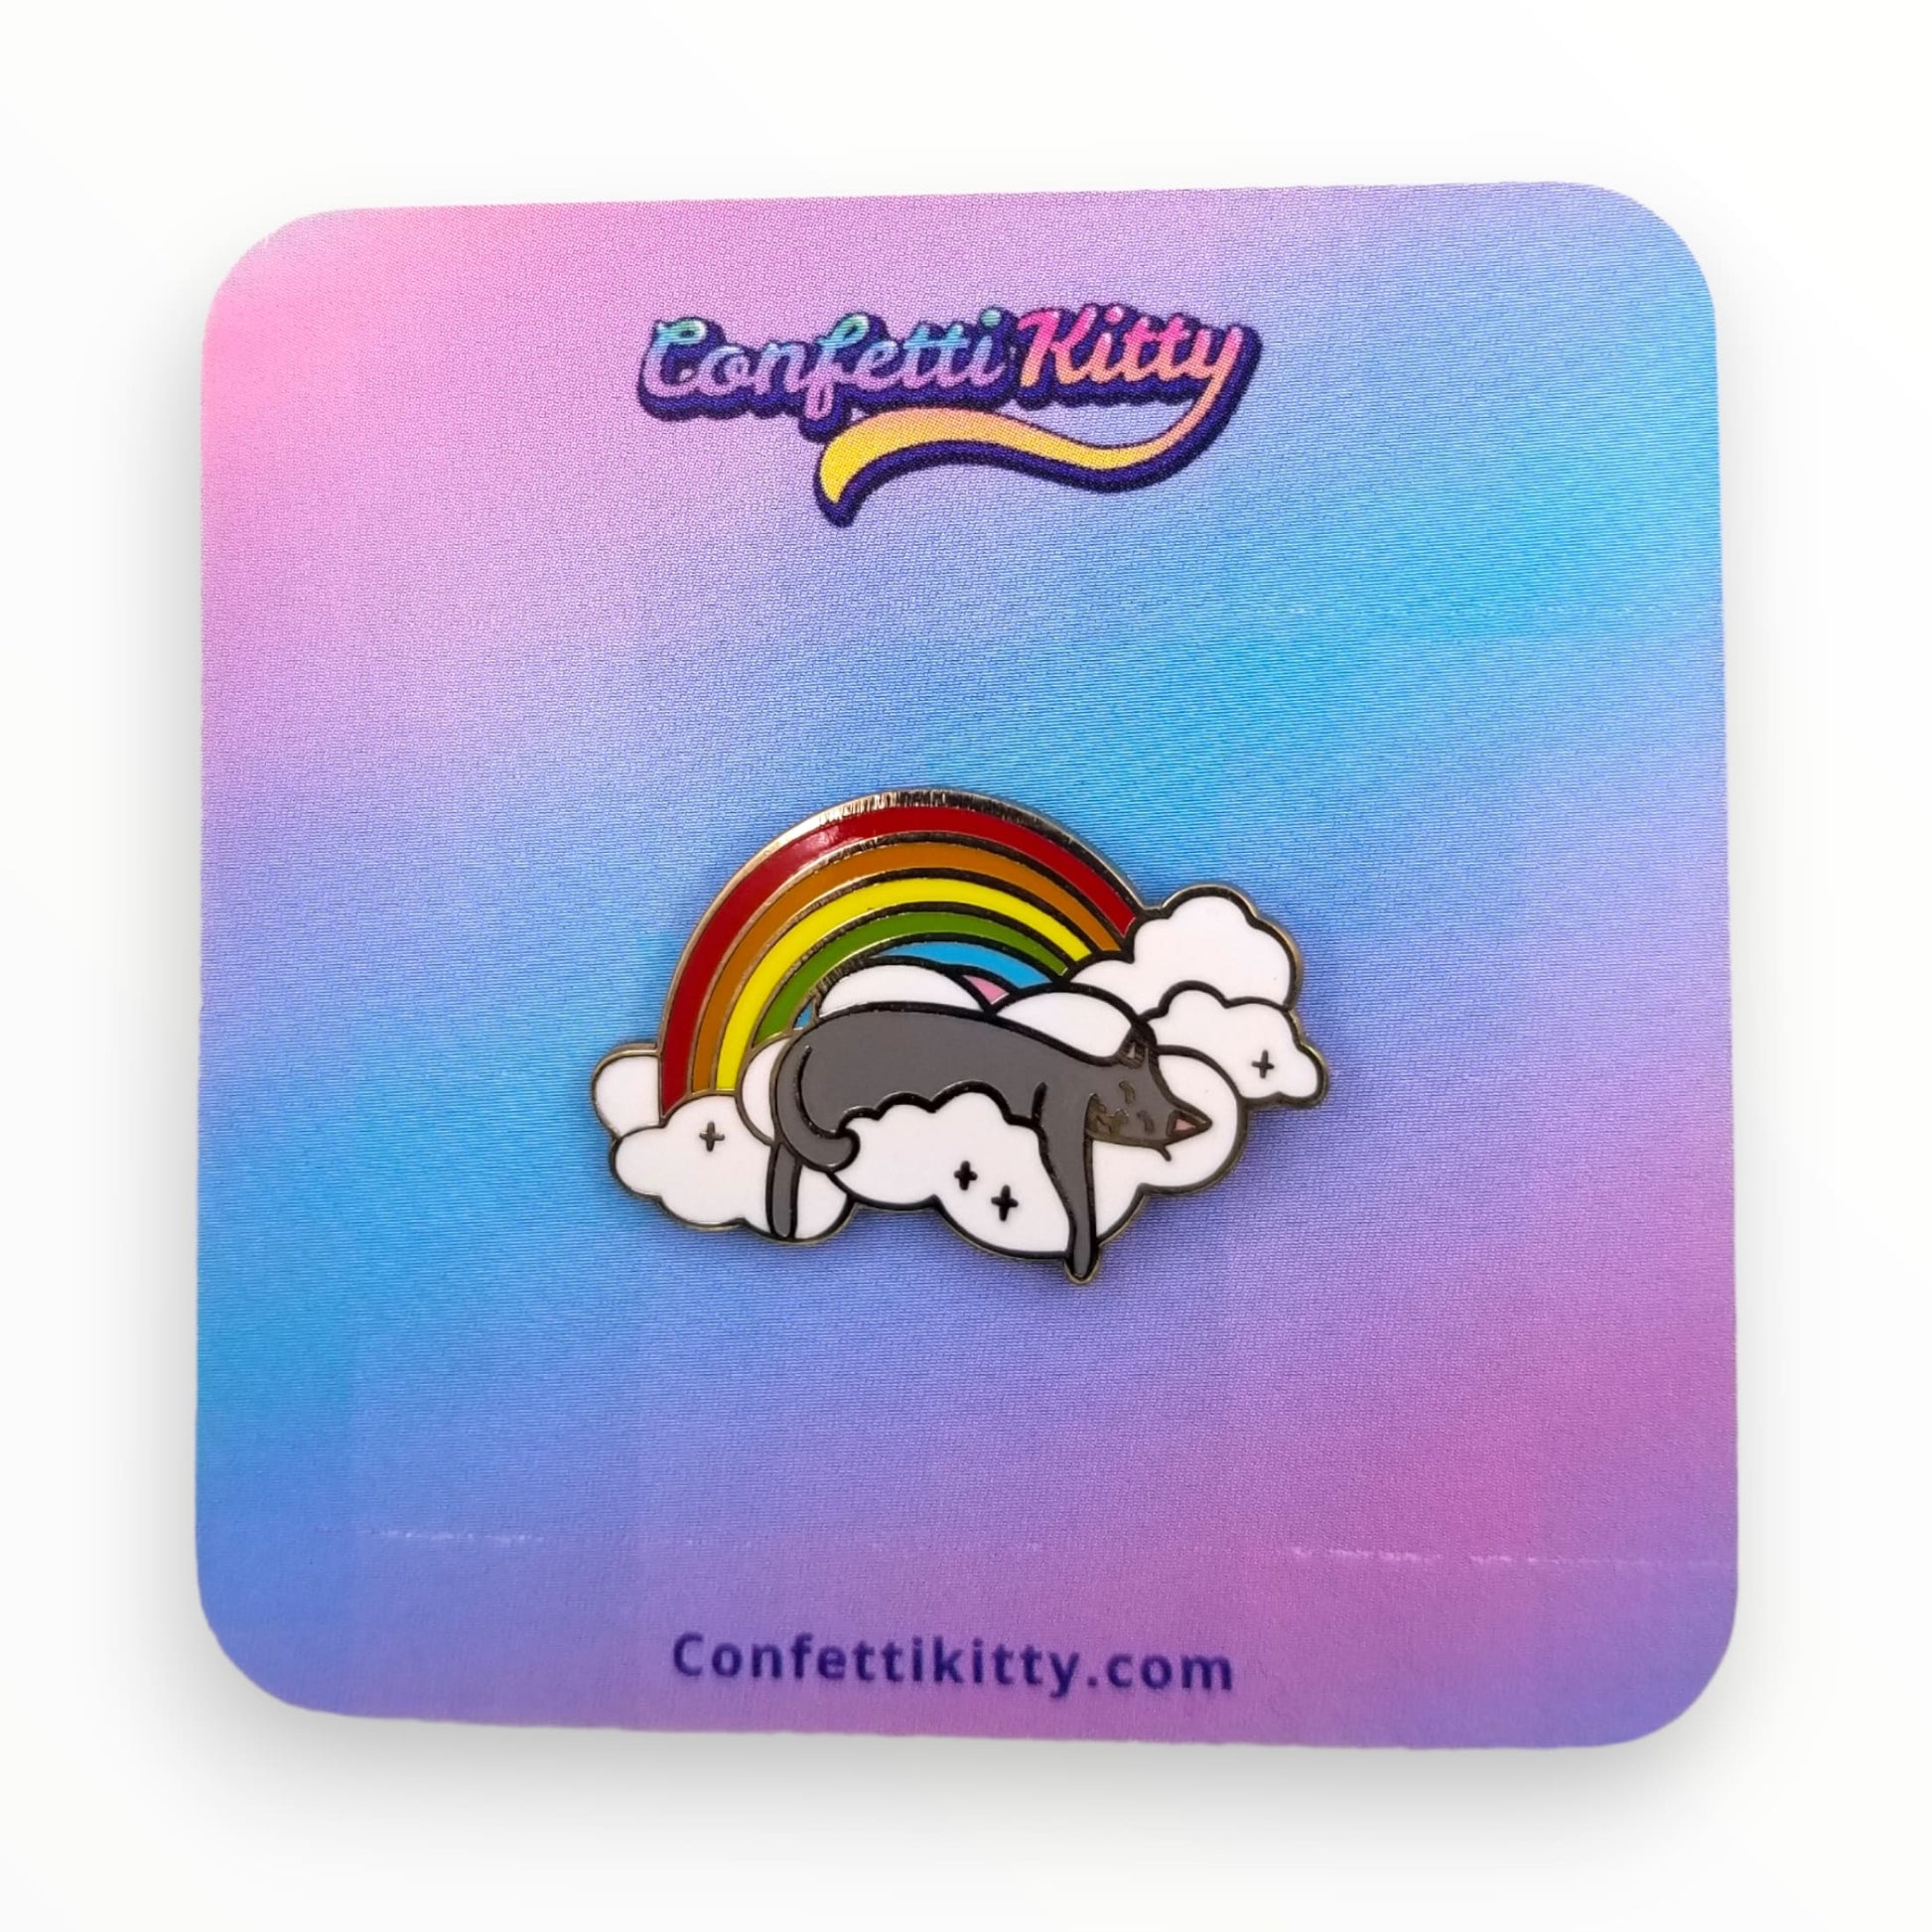 Cat on a Cloud Hard Enamel Pin from Confetti Kitty, Only 7.99